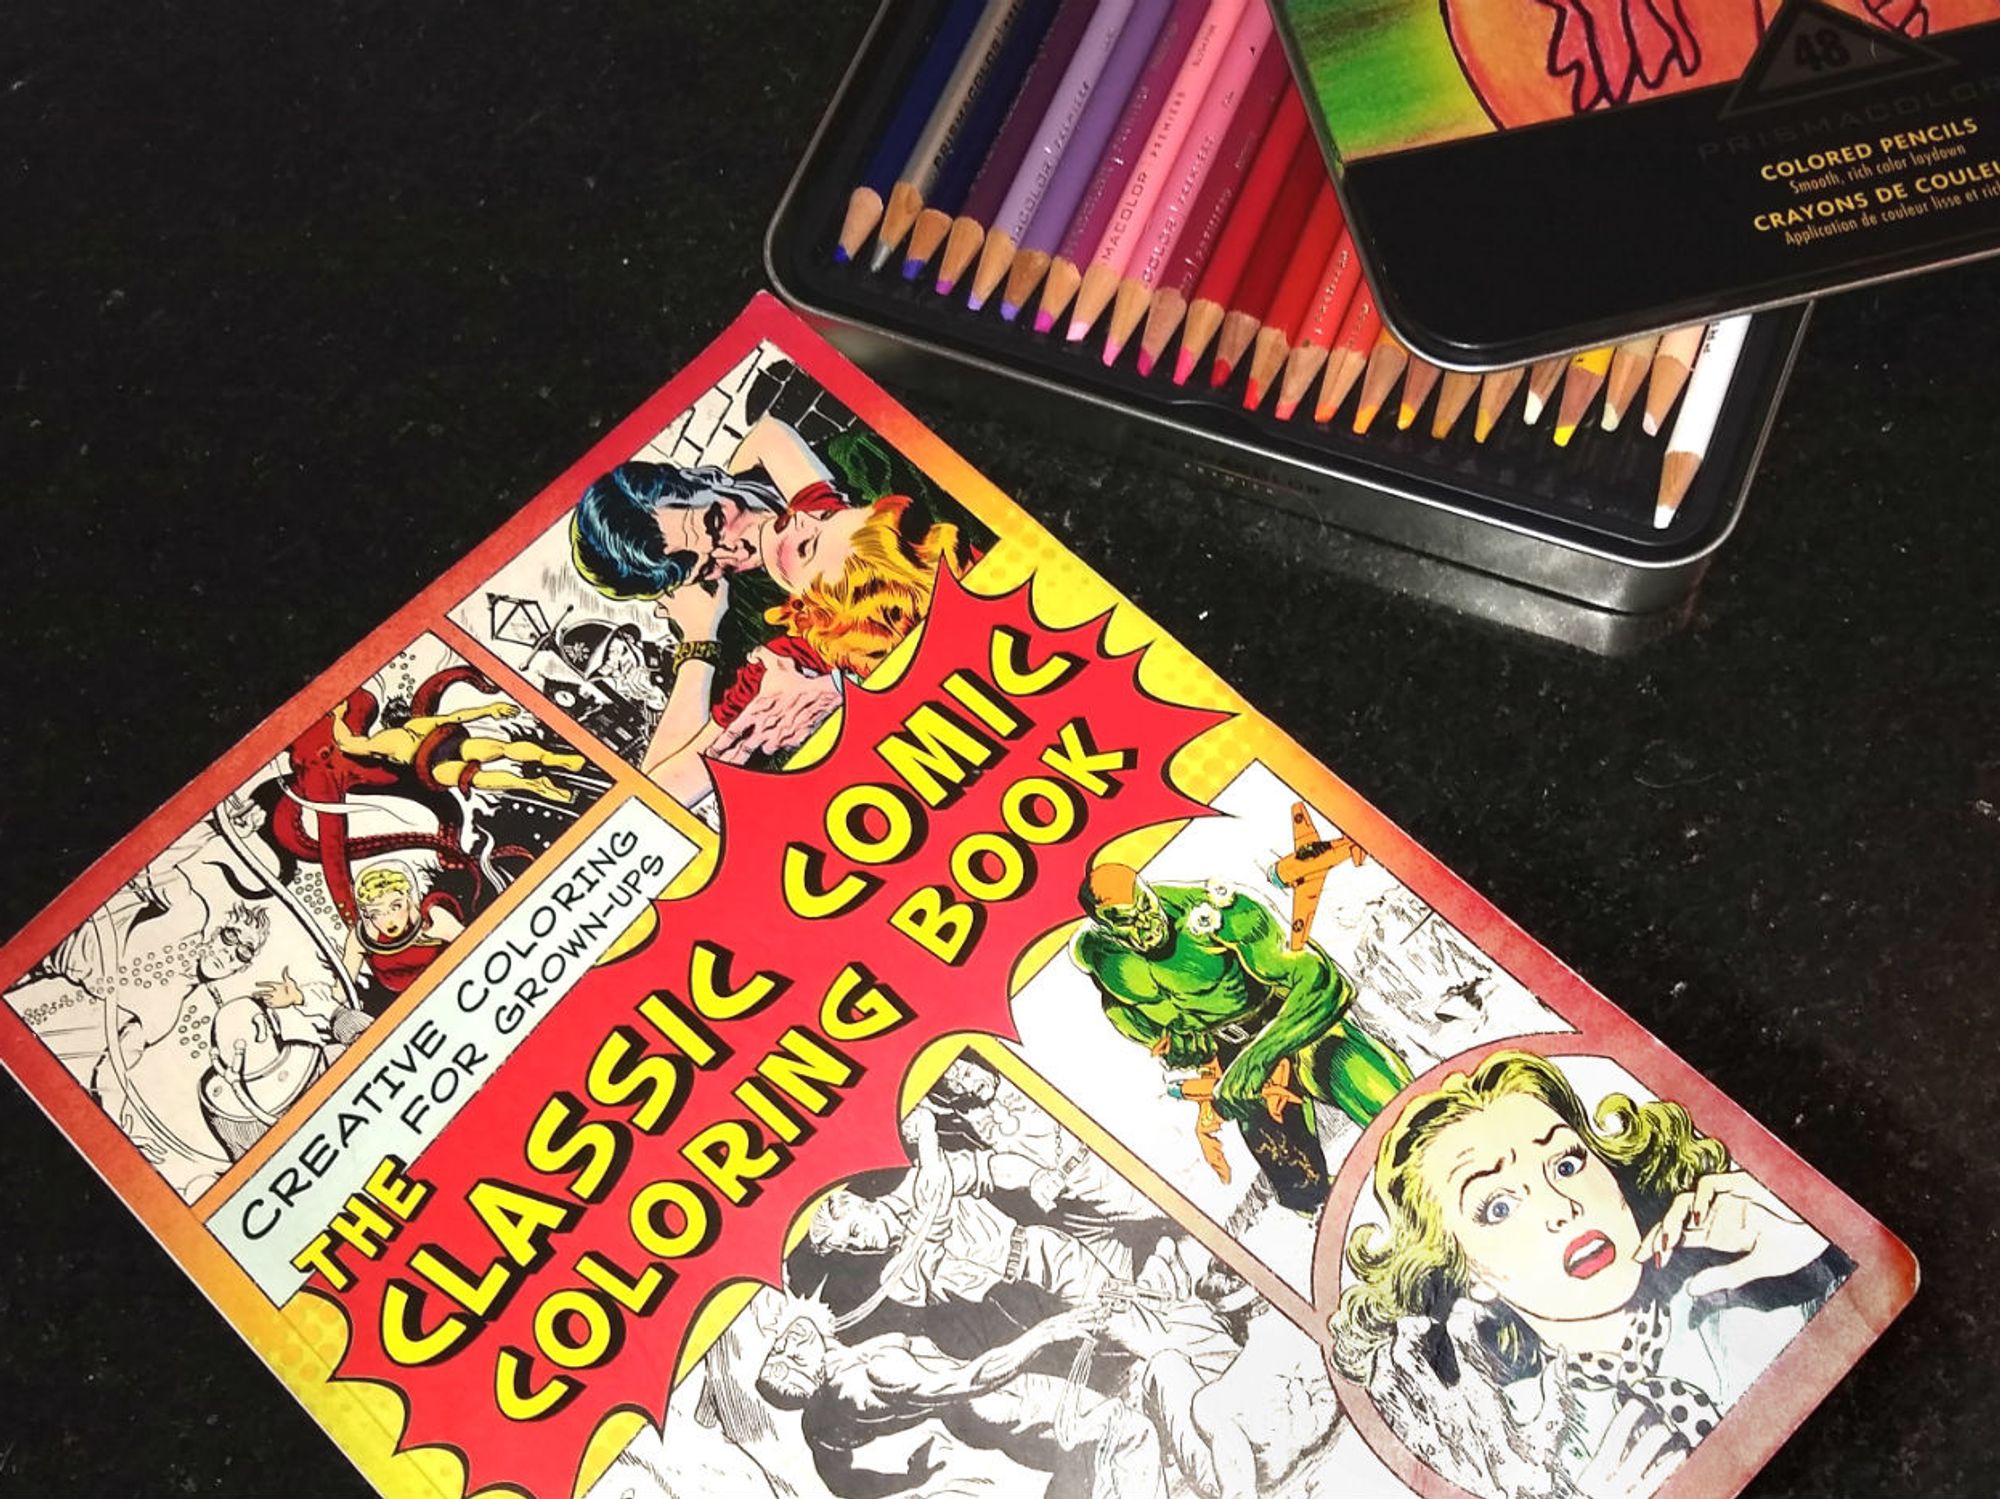 2 Creativity Hacks You Can Learn From the Adult Coloring Book Craze (Even  If Coloring Isn't Your Thing)